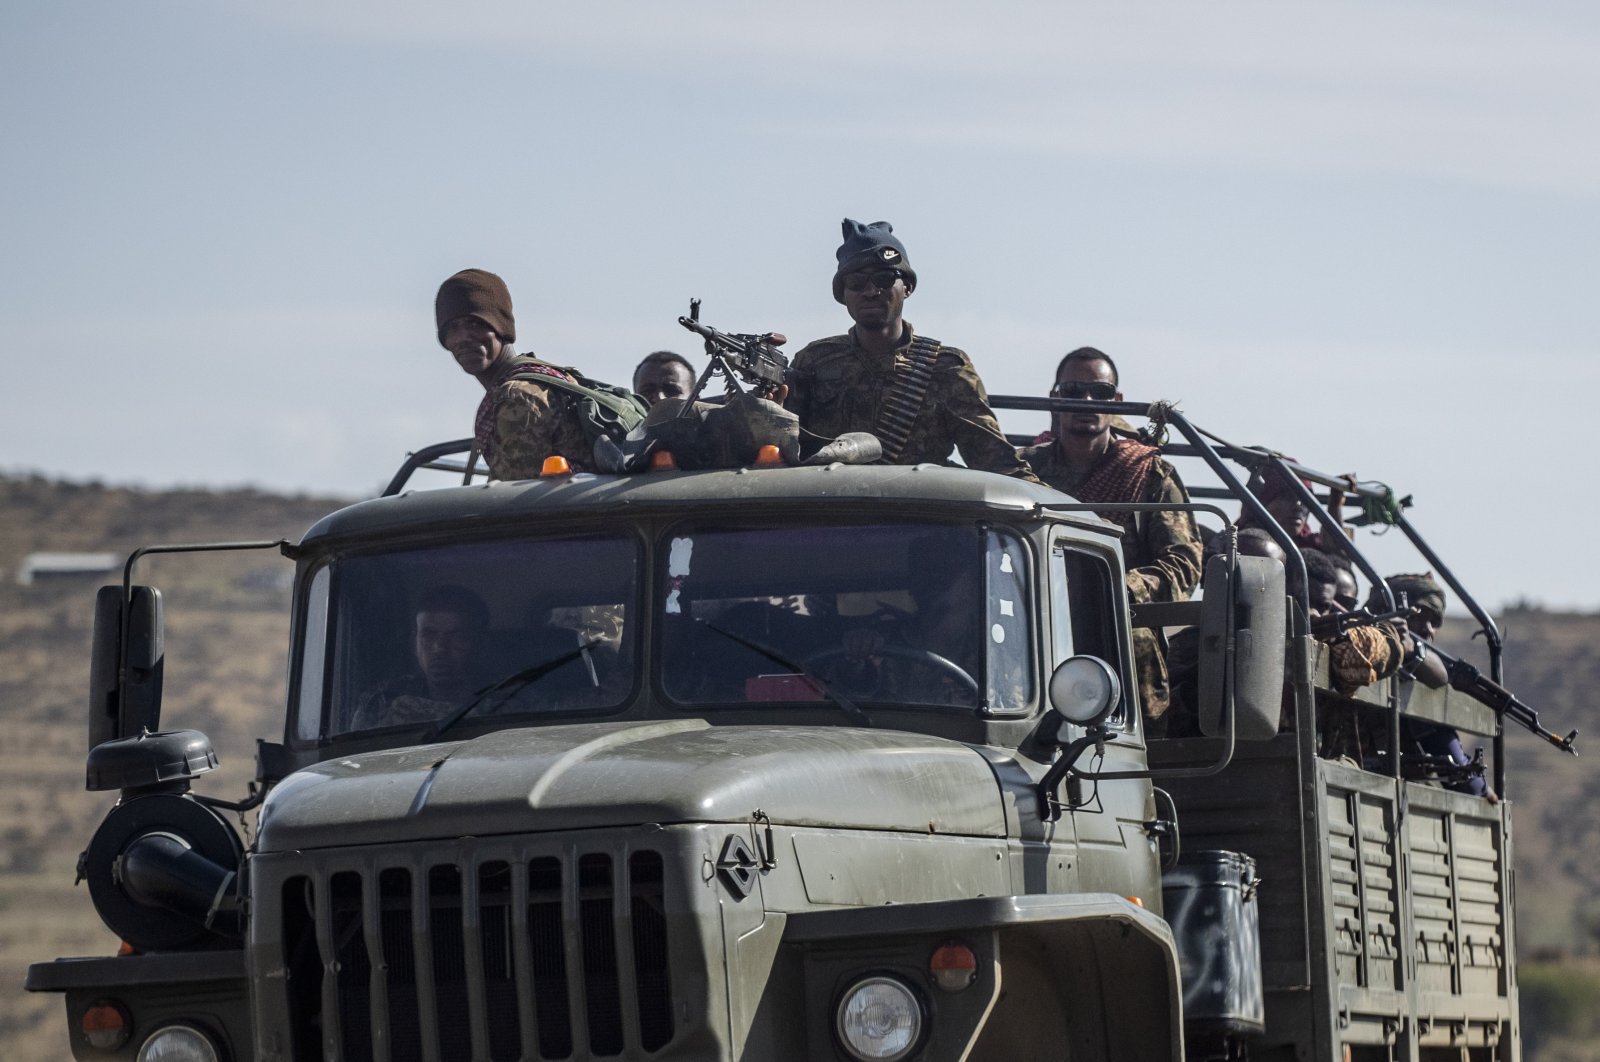 Ethiopian government soldiers ride in the back of a truck on a road near Agula, north of Mekele, in the Tigray region of northern Ethiopia on May 8, 2021. (AP Photo)